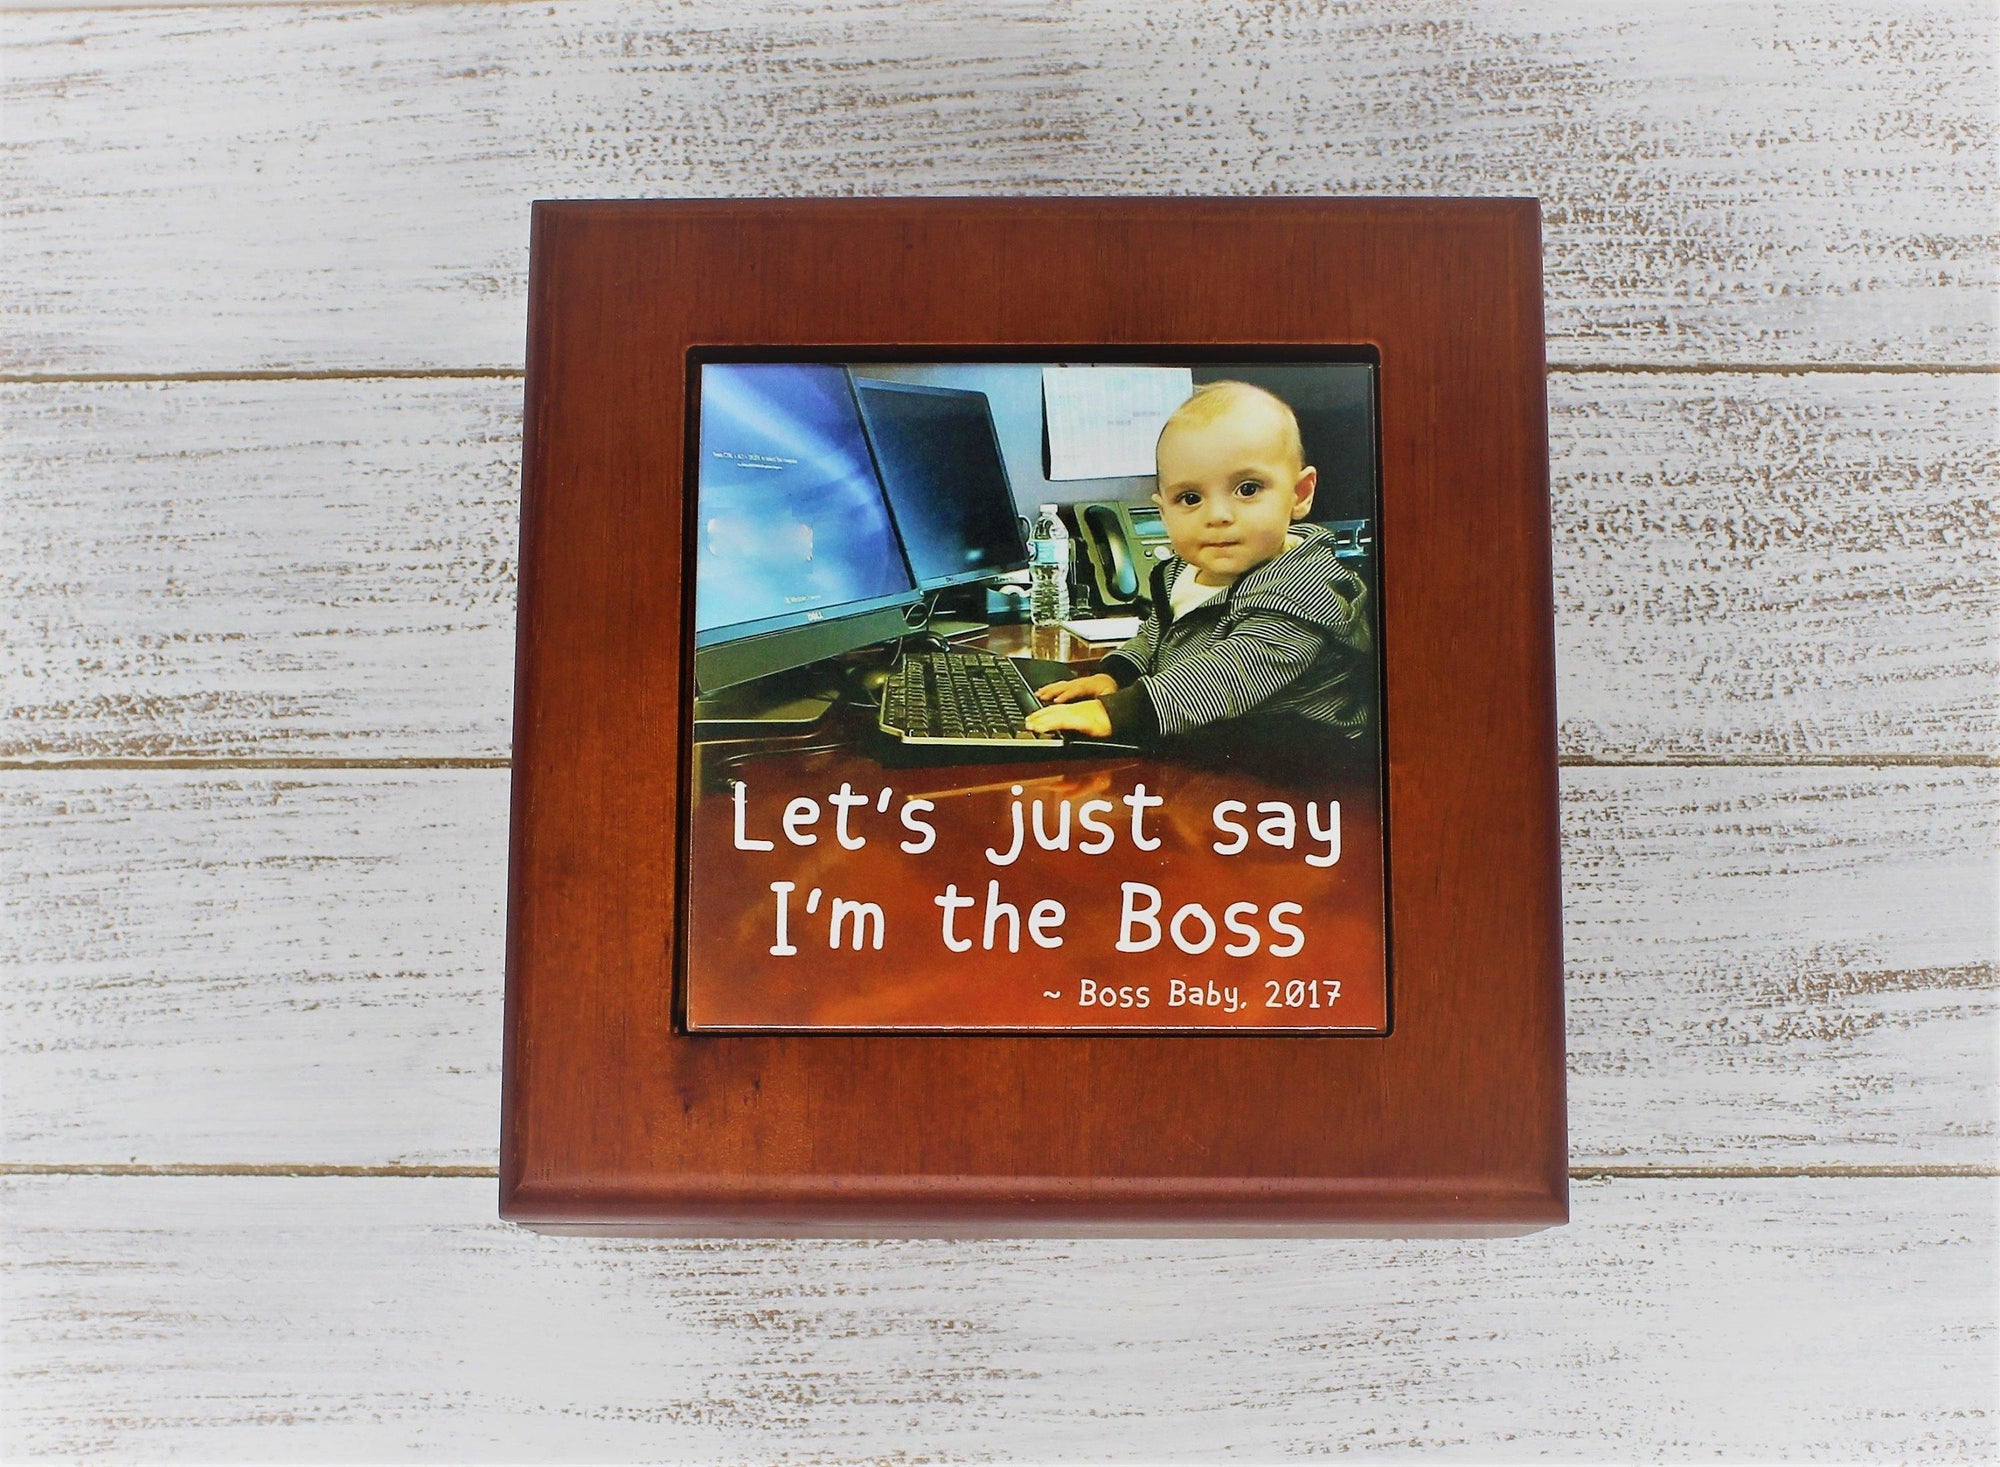 Personalized Mahogany Finished Box w/Hinge Lid | Custom Design - This & That Solutions - Personalized Mahogany Finished Box w/Hinge Lid | Custom Design - Personalized Gifts & Custom Home Decor